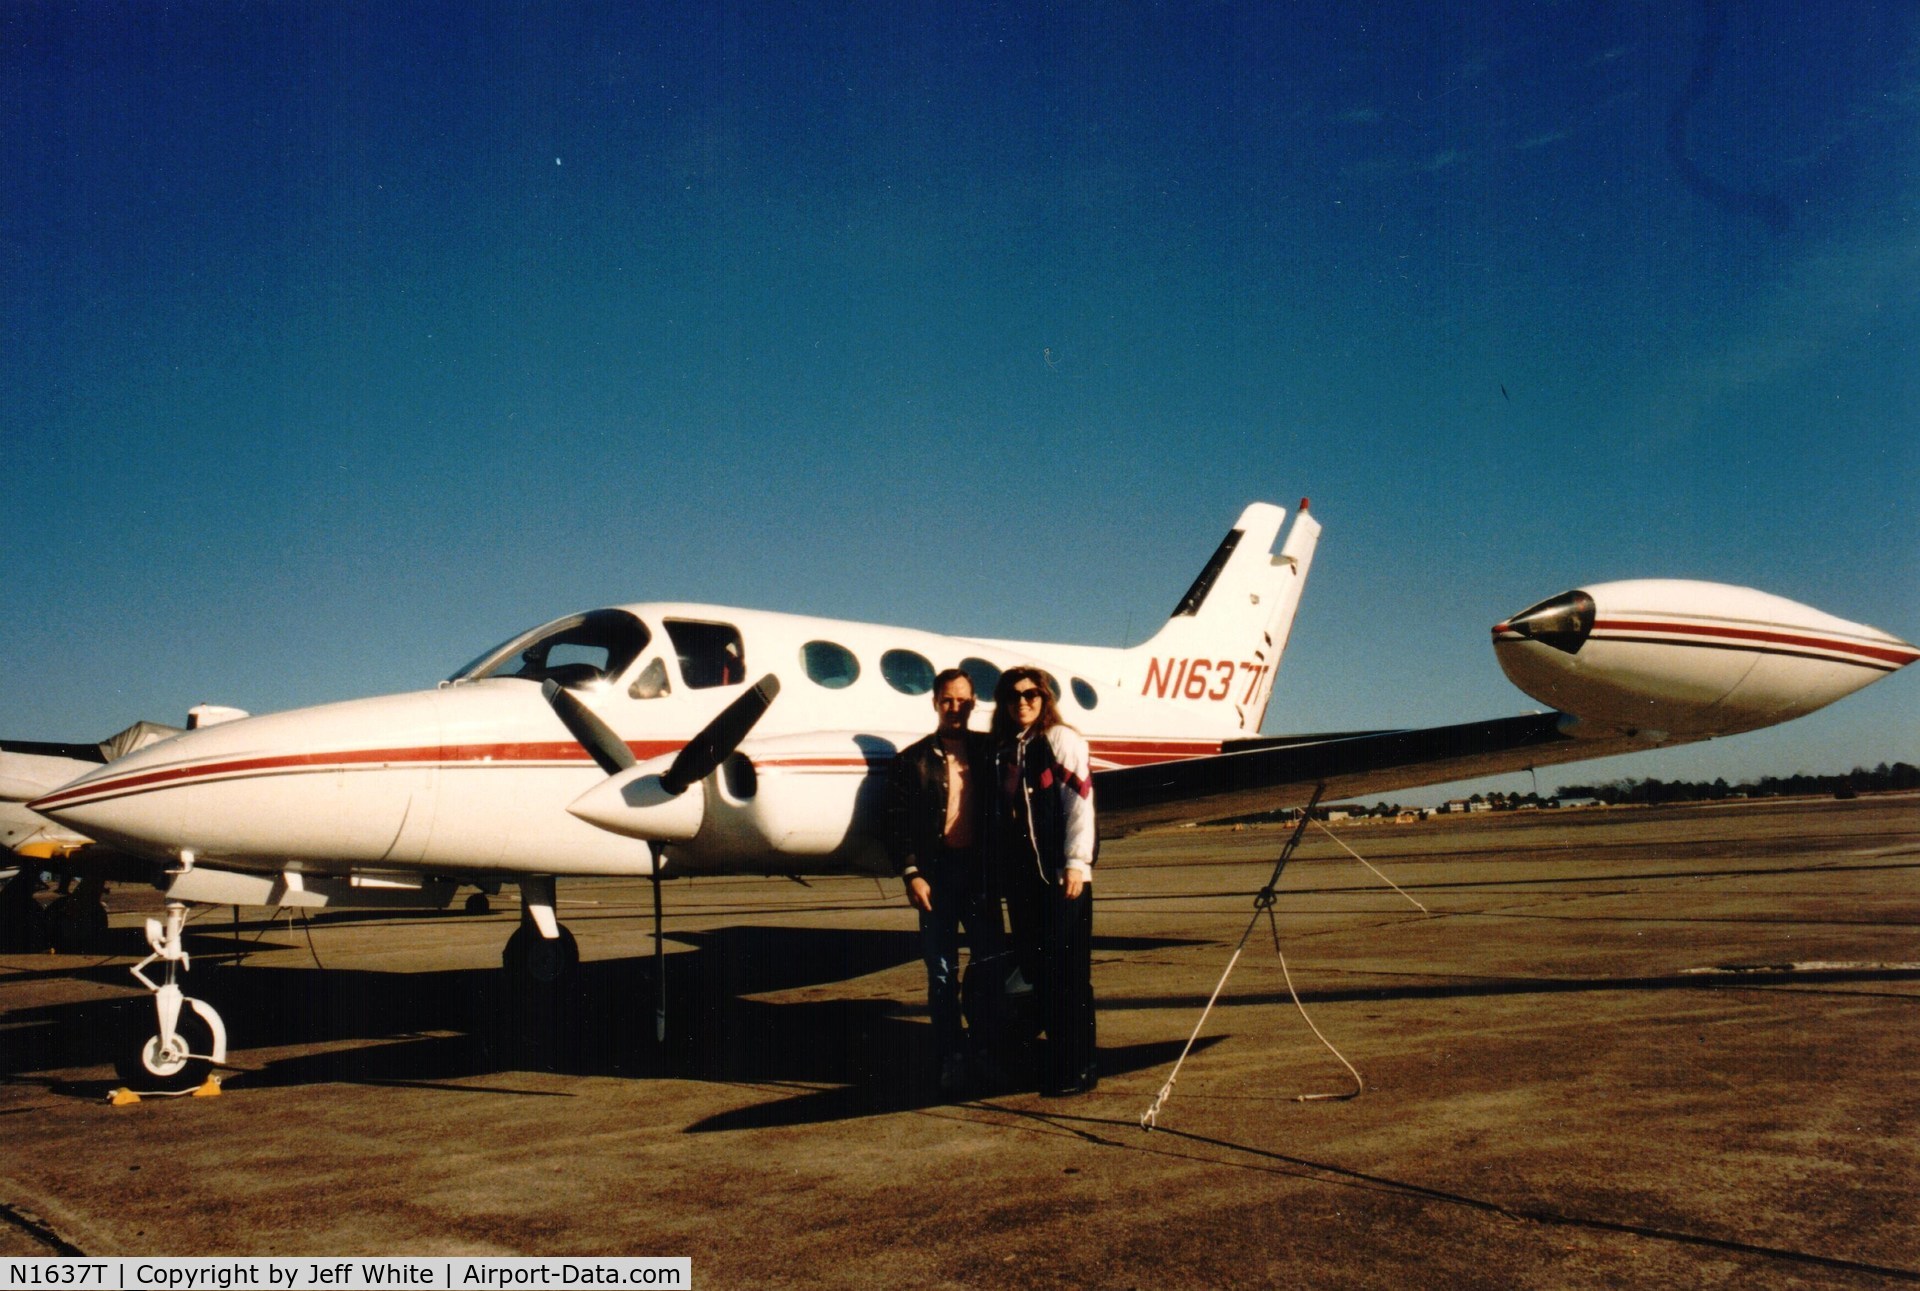 N1637T, 1973 Cessna 414 Chancellor C/N 414-0417, Great company plane